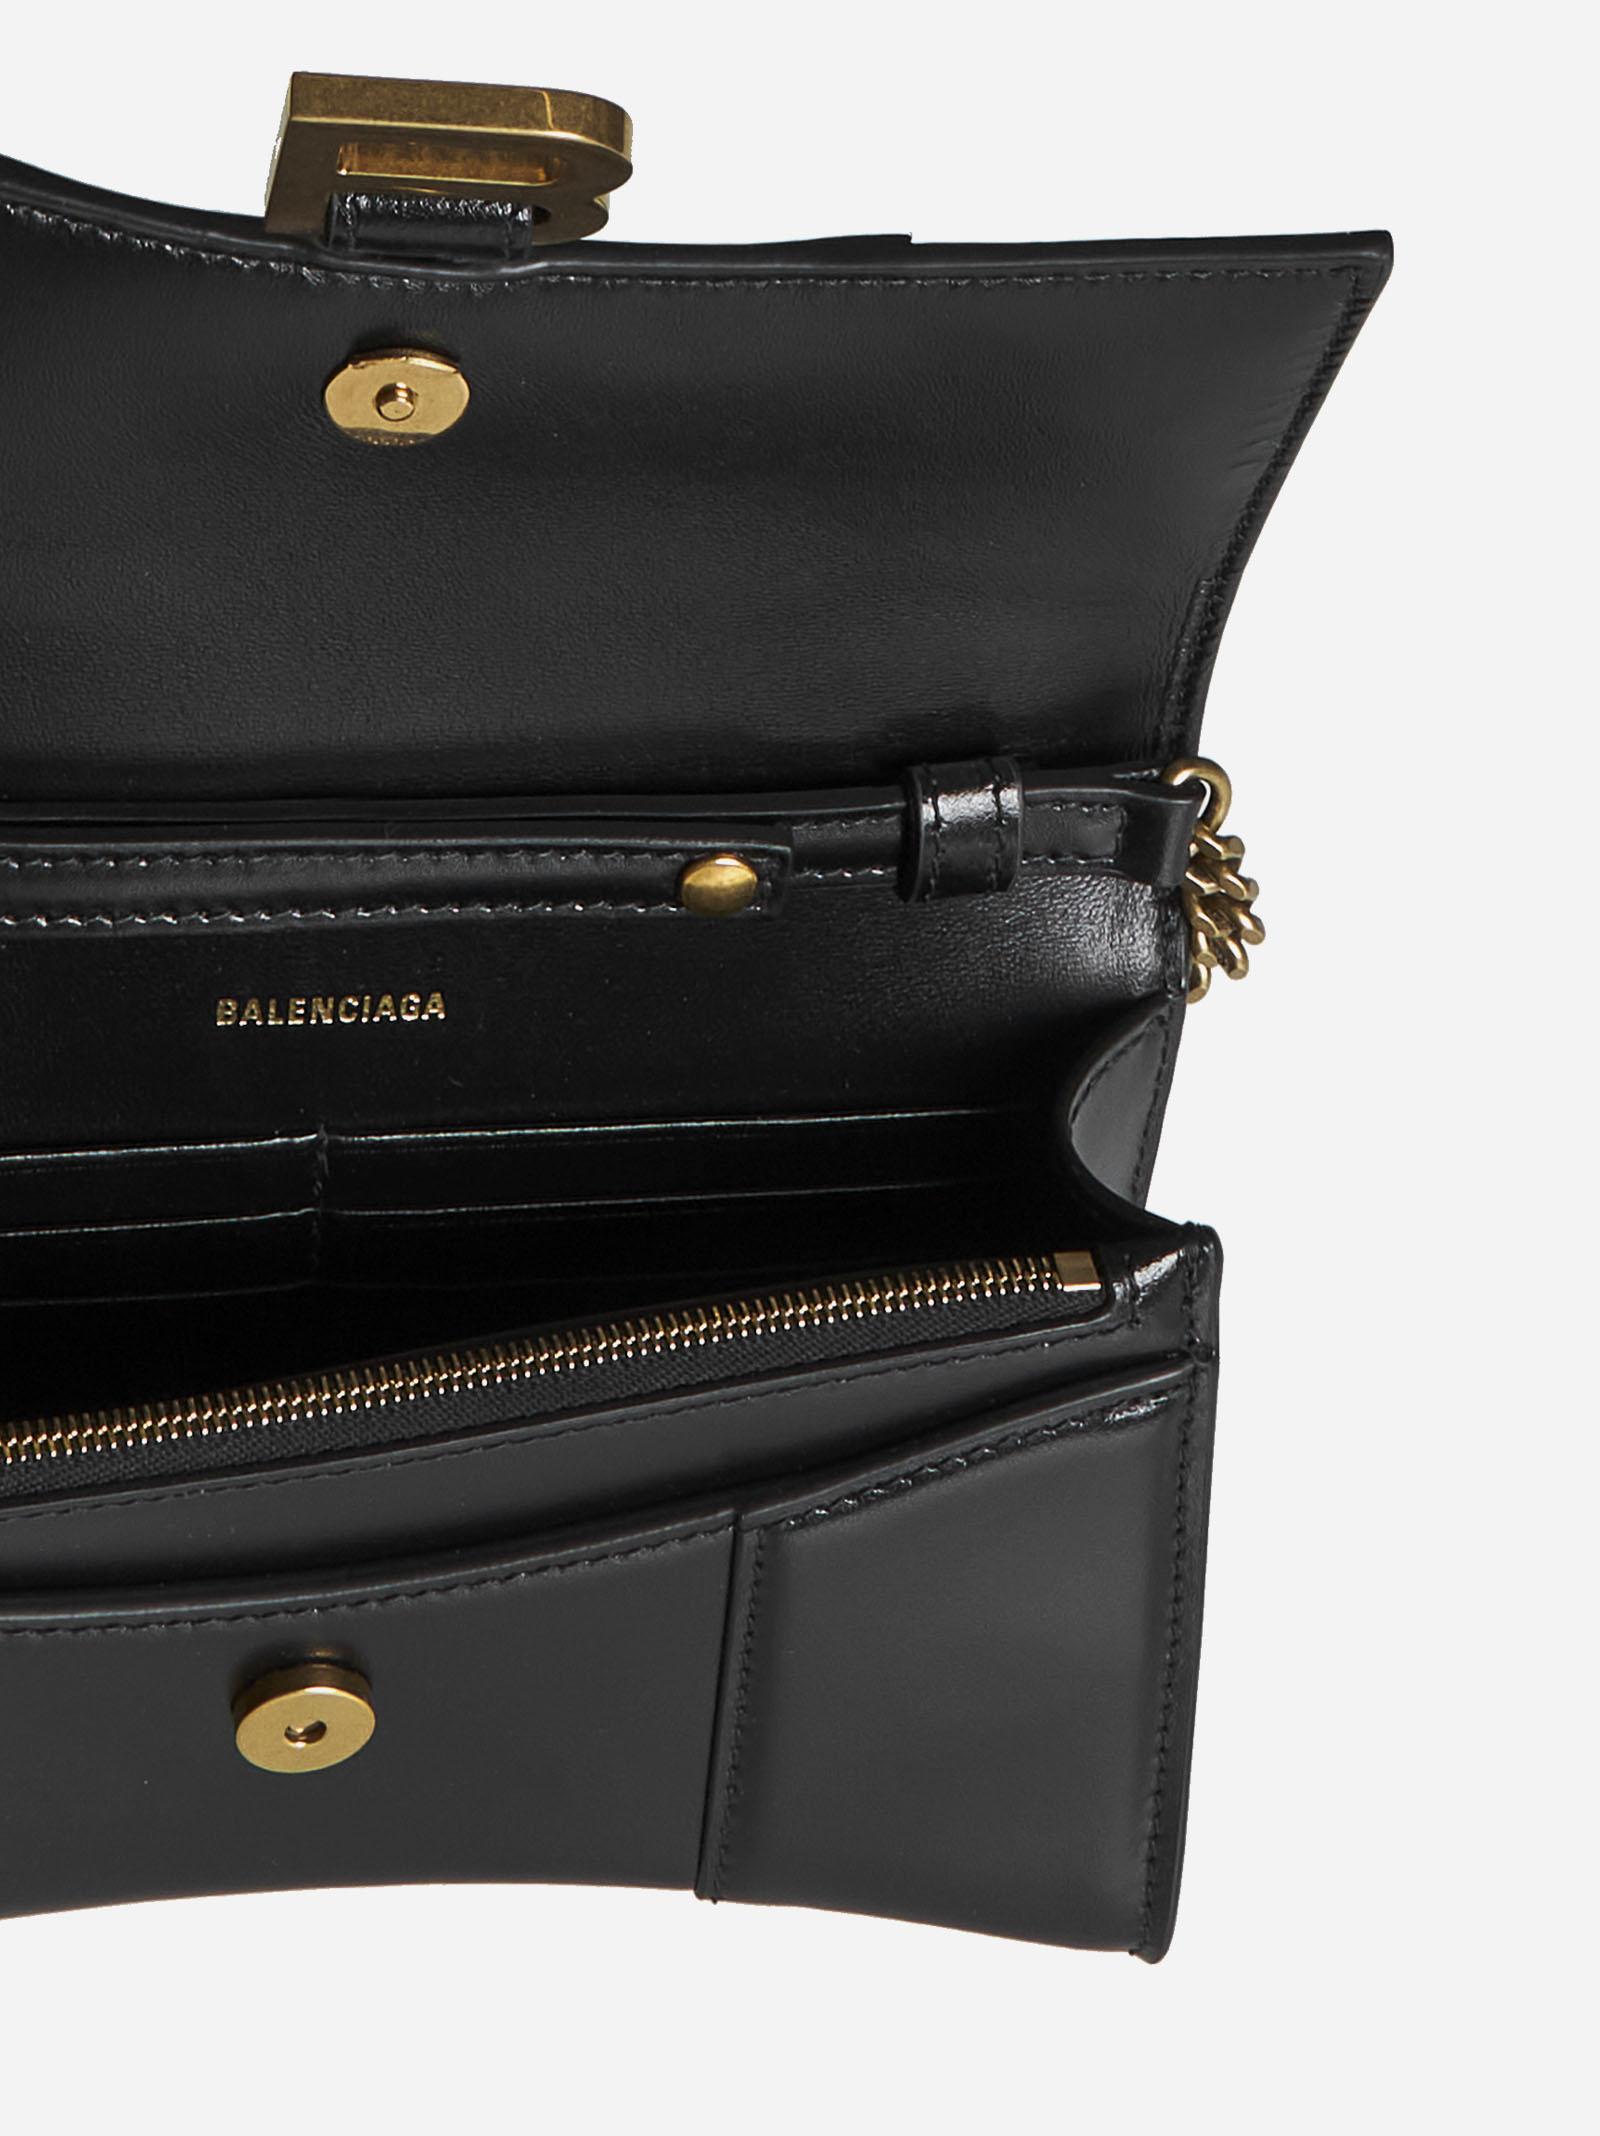 Balenciaga Hourglass Leather Wallet On Chain Bag in Black